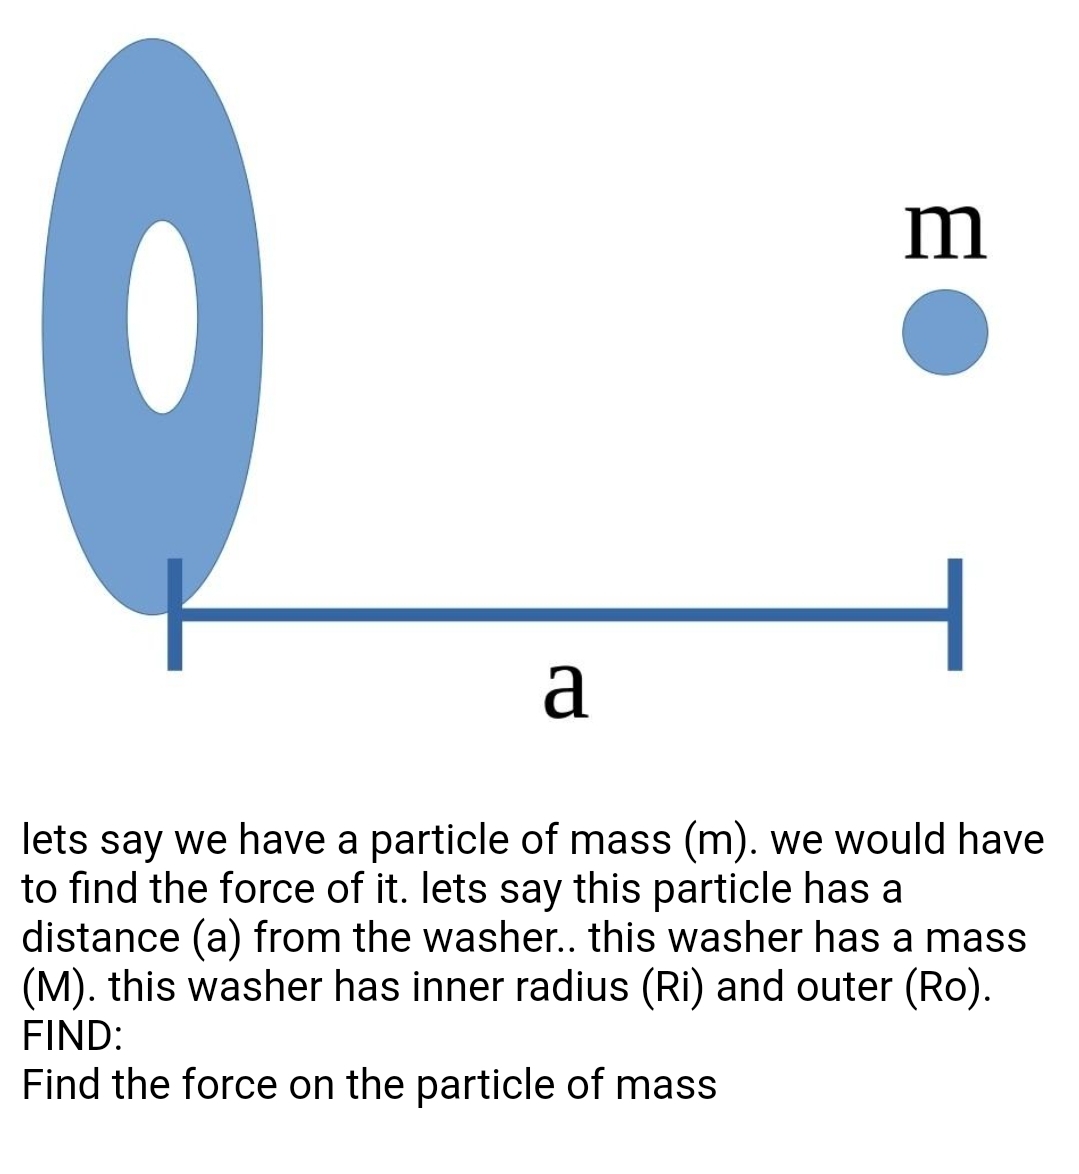 m
a
lets say we have a particle of mass (m). we would have
to find the force of it. lets say this particle has a
distance (a) from the washe.. this washer has a mass
(M). this washer has inner radius (Ri) and outer (Ro).
FIND:
Find the force on the particle of mass
